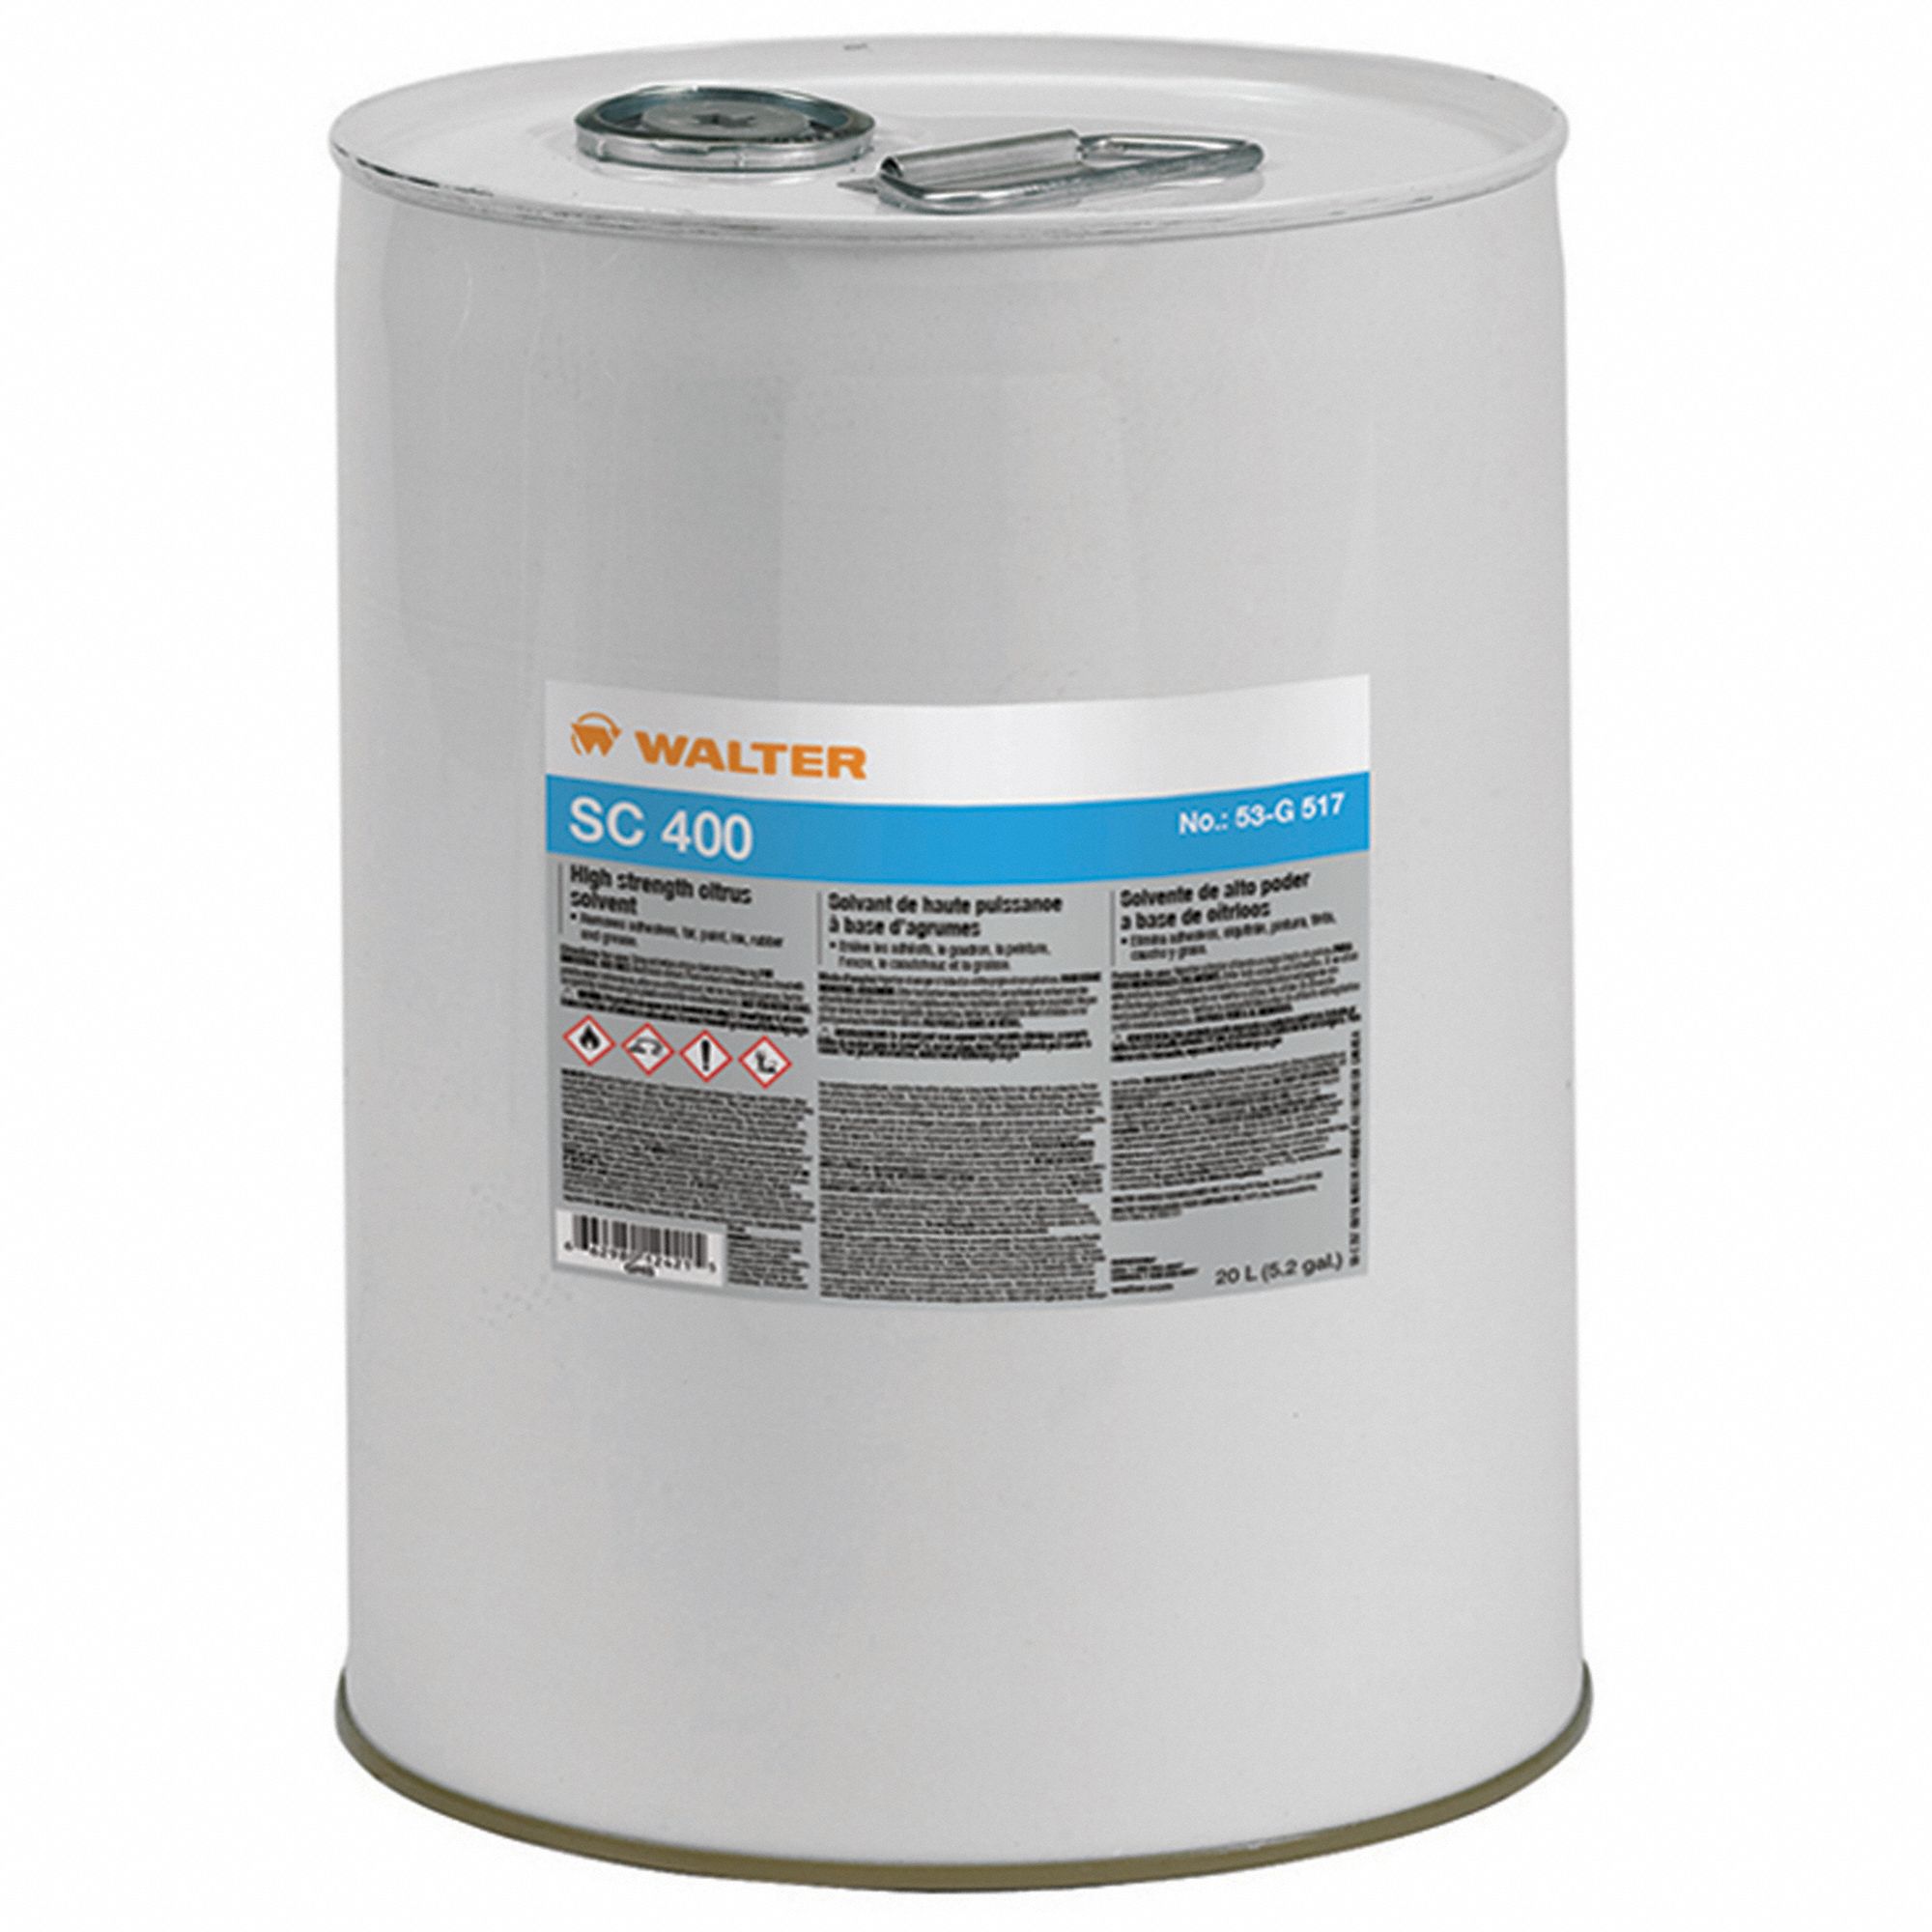 Parts Washer Cleaner: Solvent, For Metals Material Group, Metals, 113°F Flash Point, SC 400